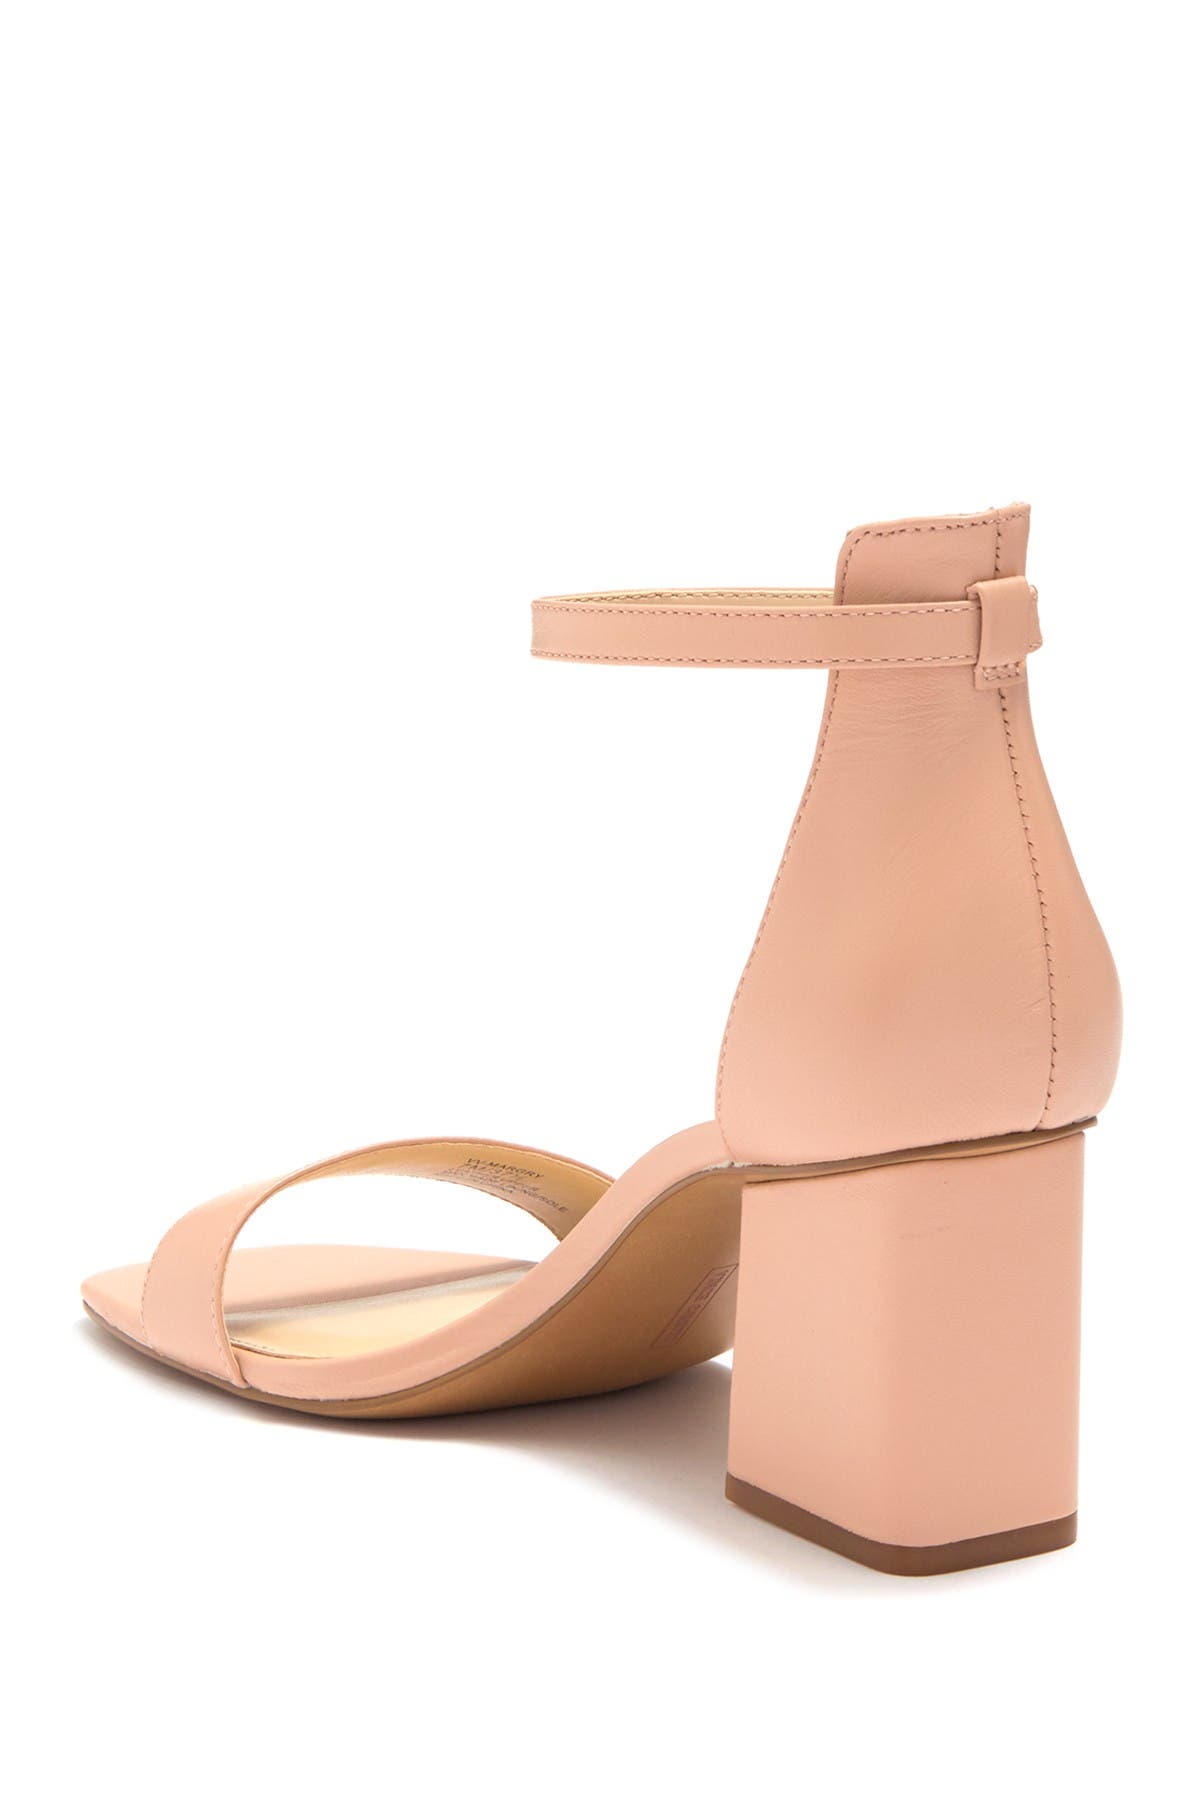 Vince Camuto Margry Block Heel Sandal In Ltpink 01